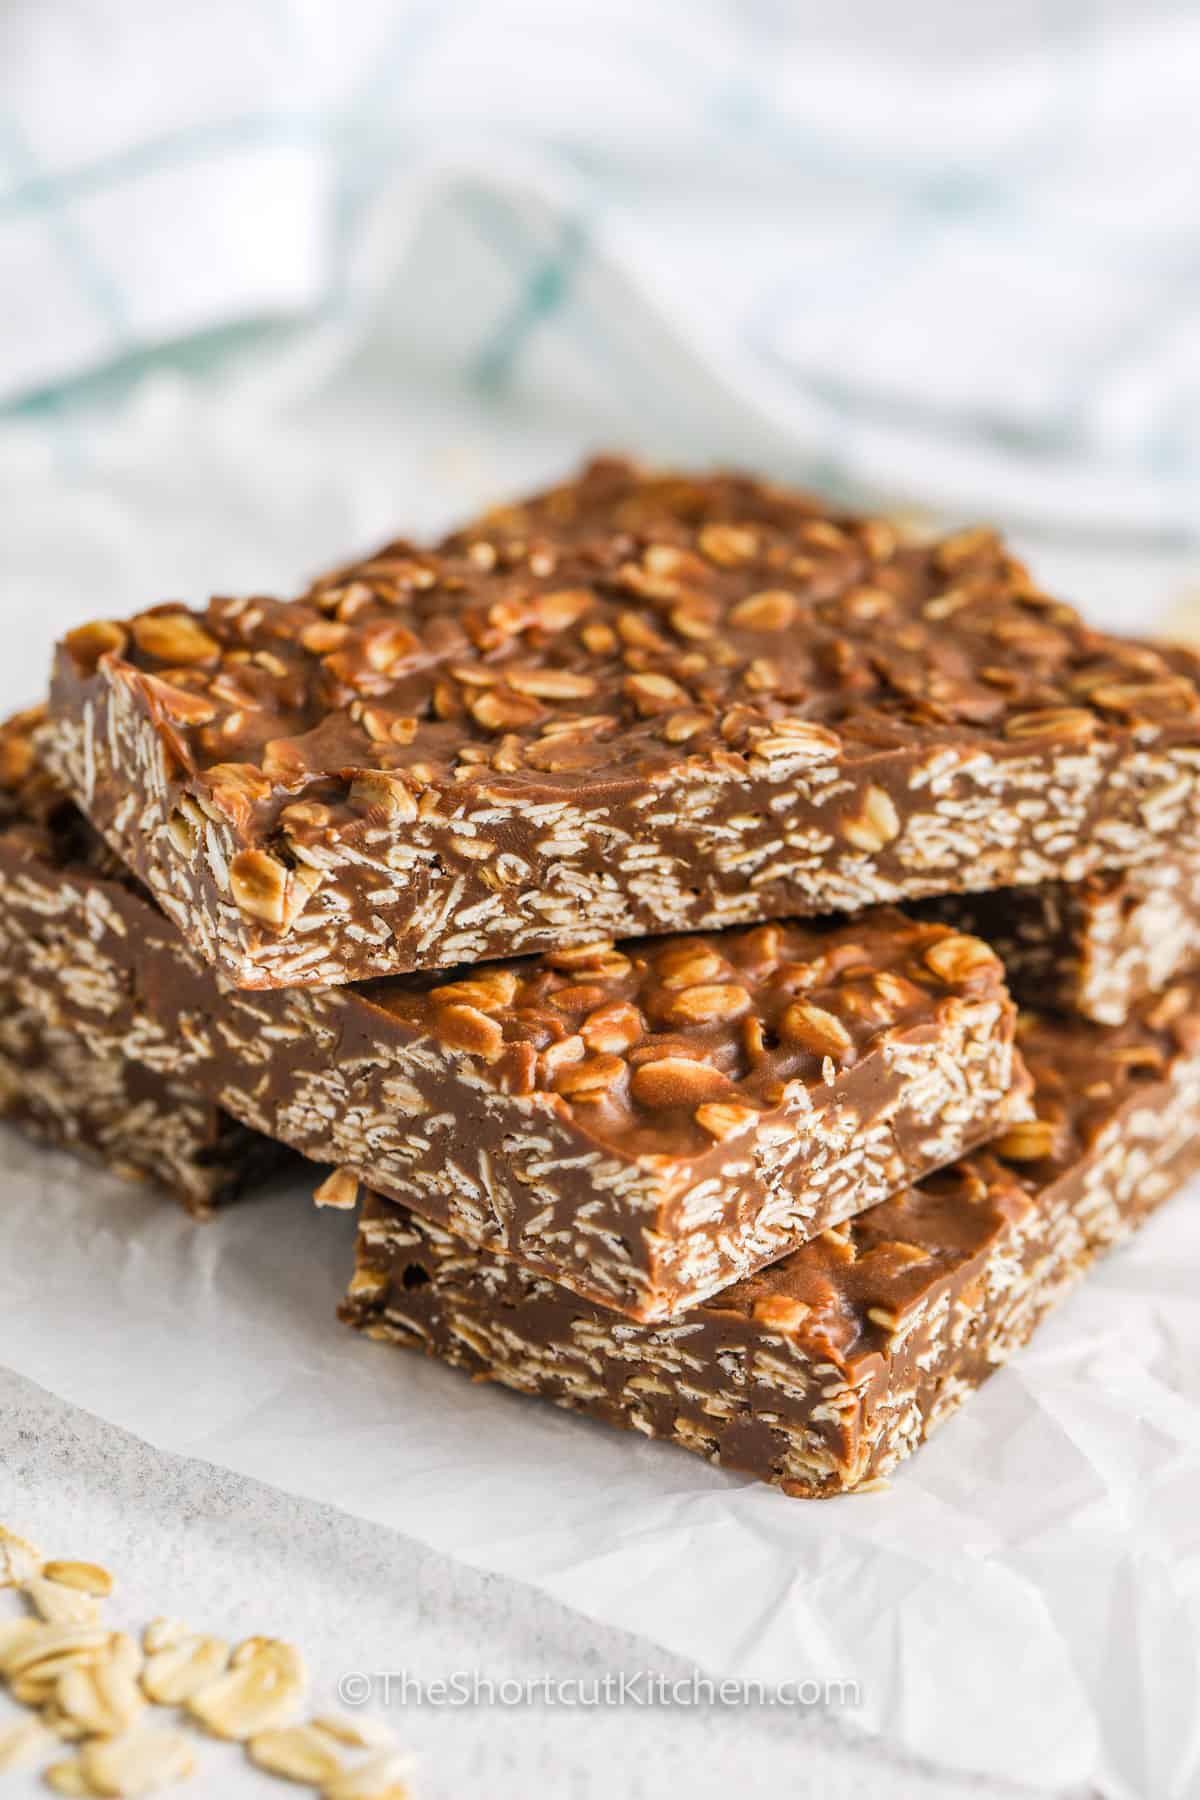 A stack of No Bake Peanut Butter Oatmeal Bars